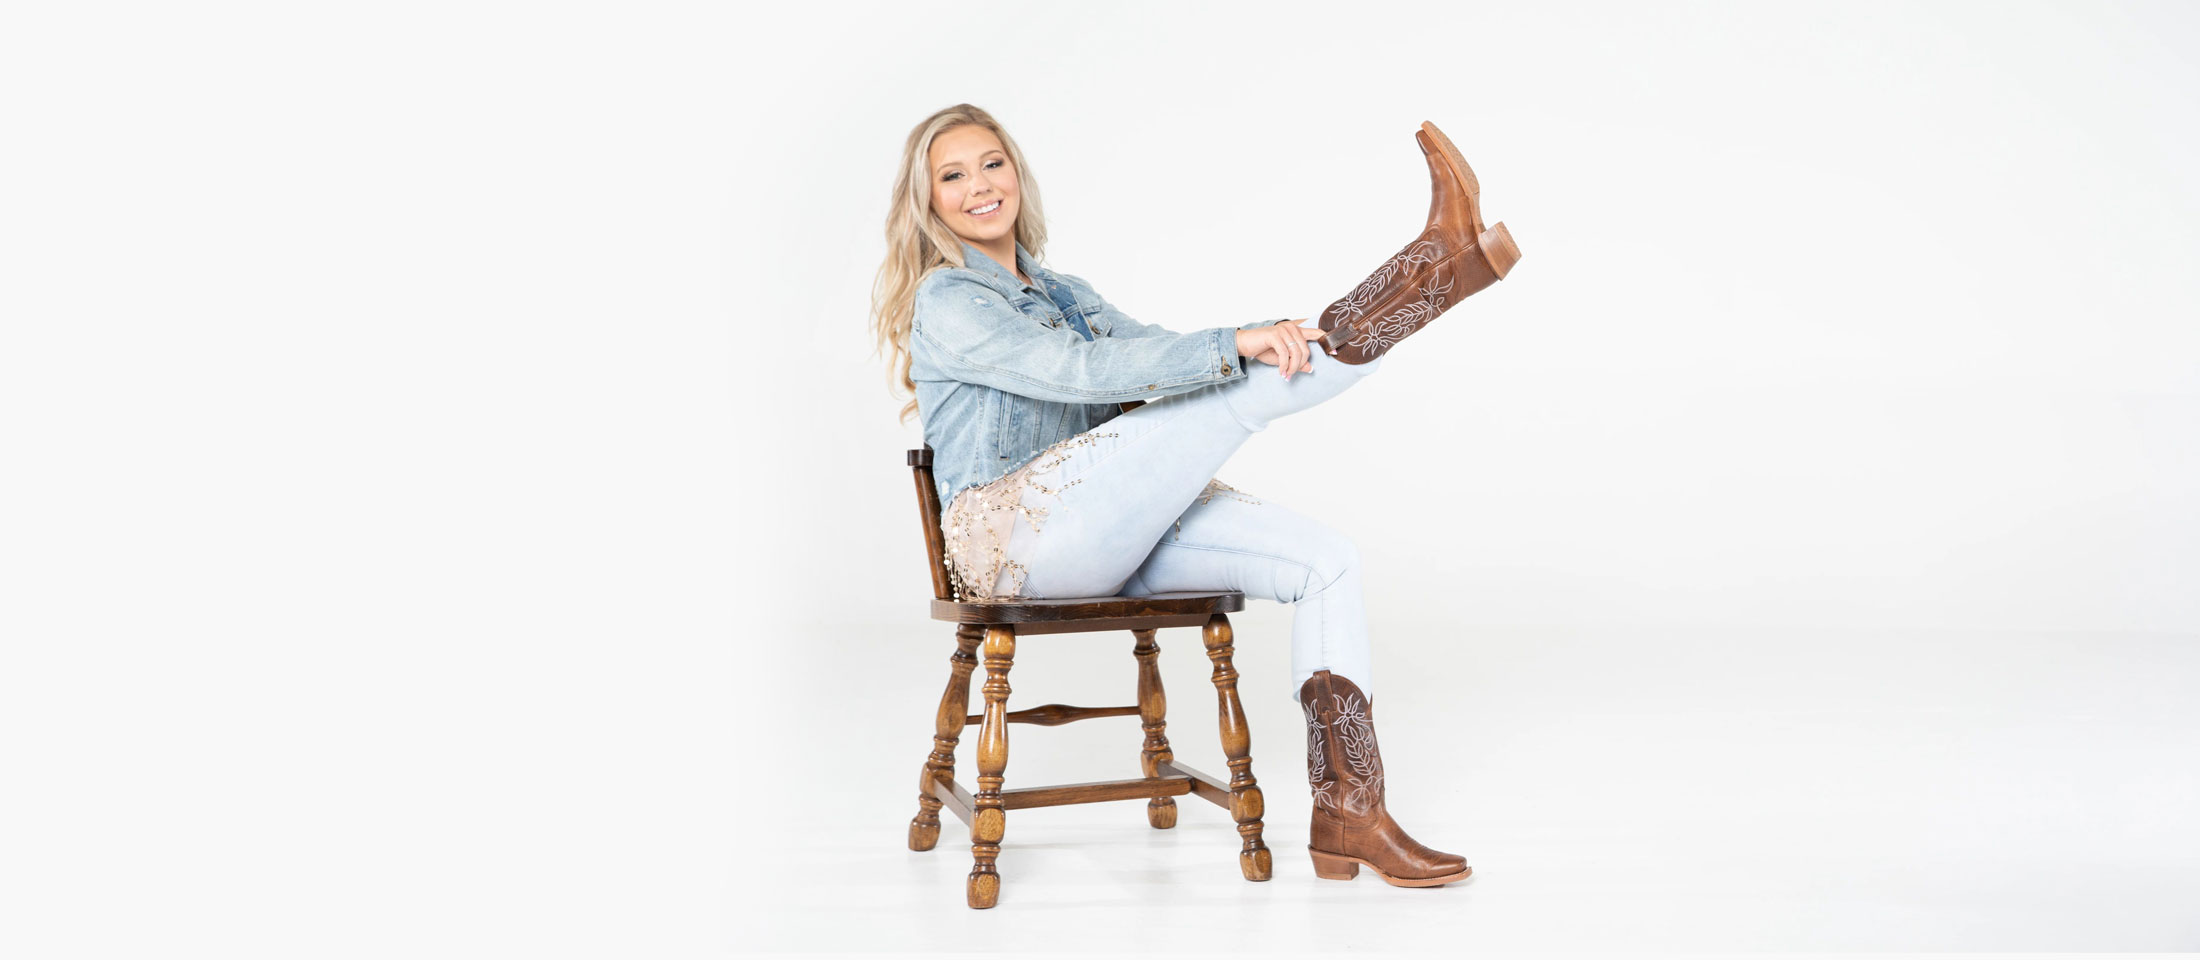 A woman wearing a jean jacket and jeans, sitting in a chair putting on cowboy boots.